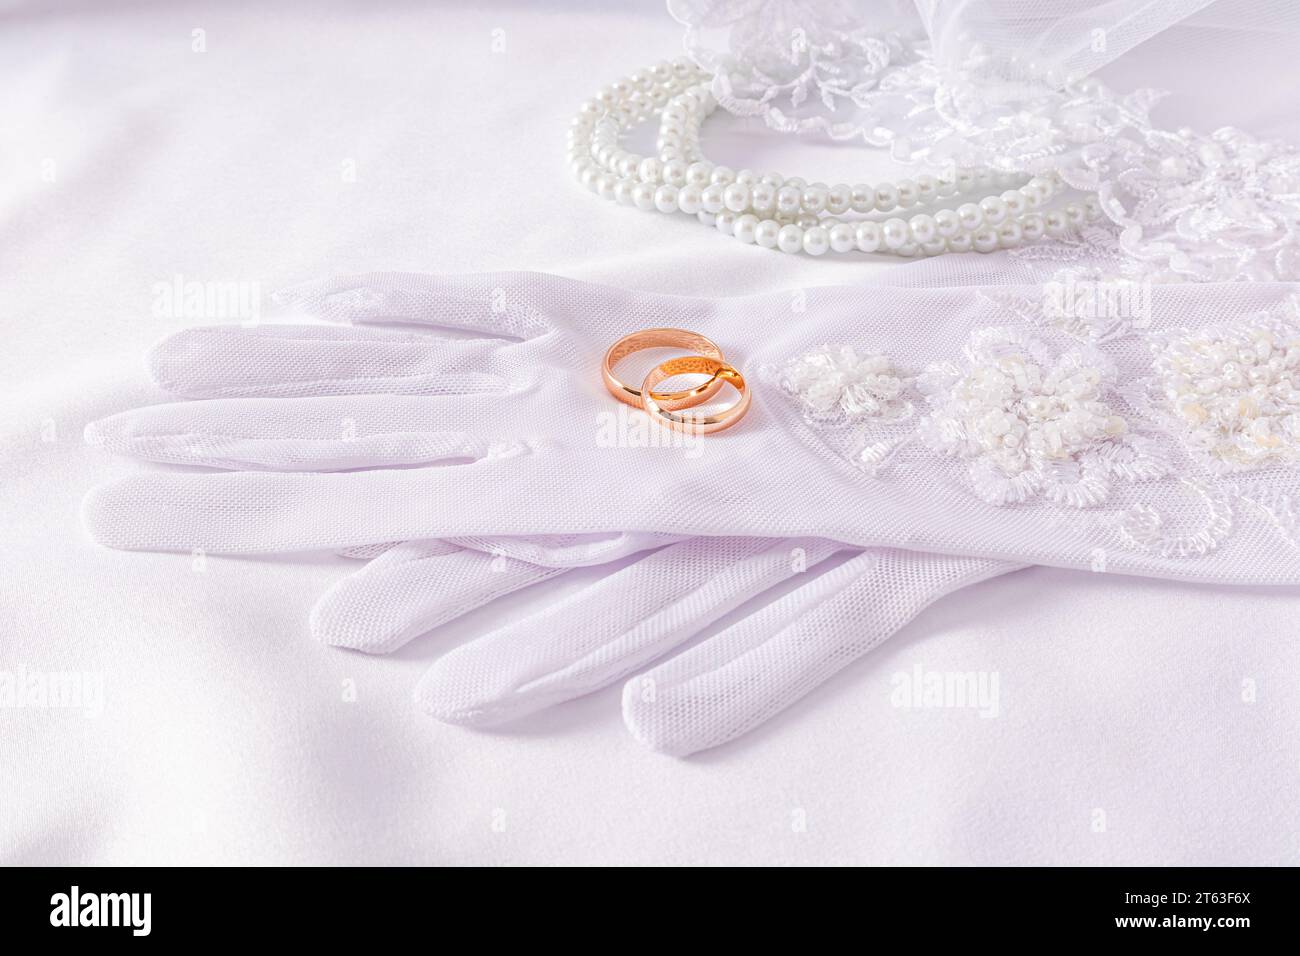 A pair of gold wedding rings lie on luxuriouswedding white gloves. White satin background with pearl beads. Wedding accessories concept Stock Photo